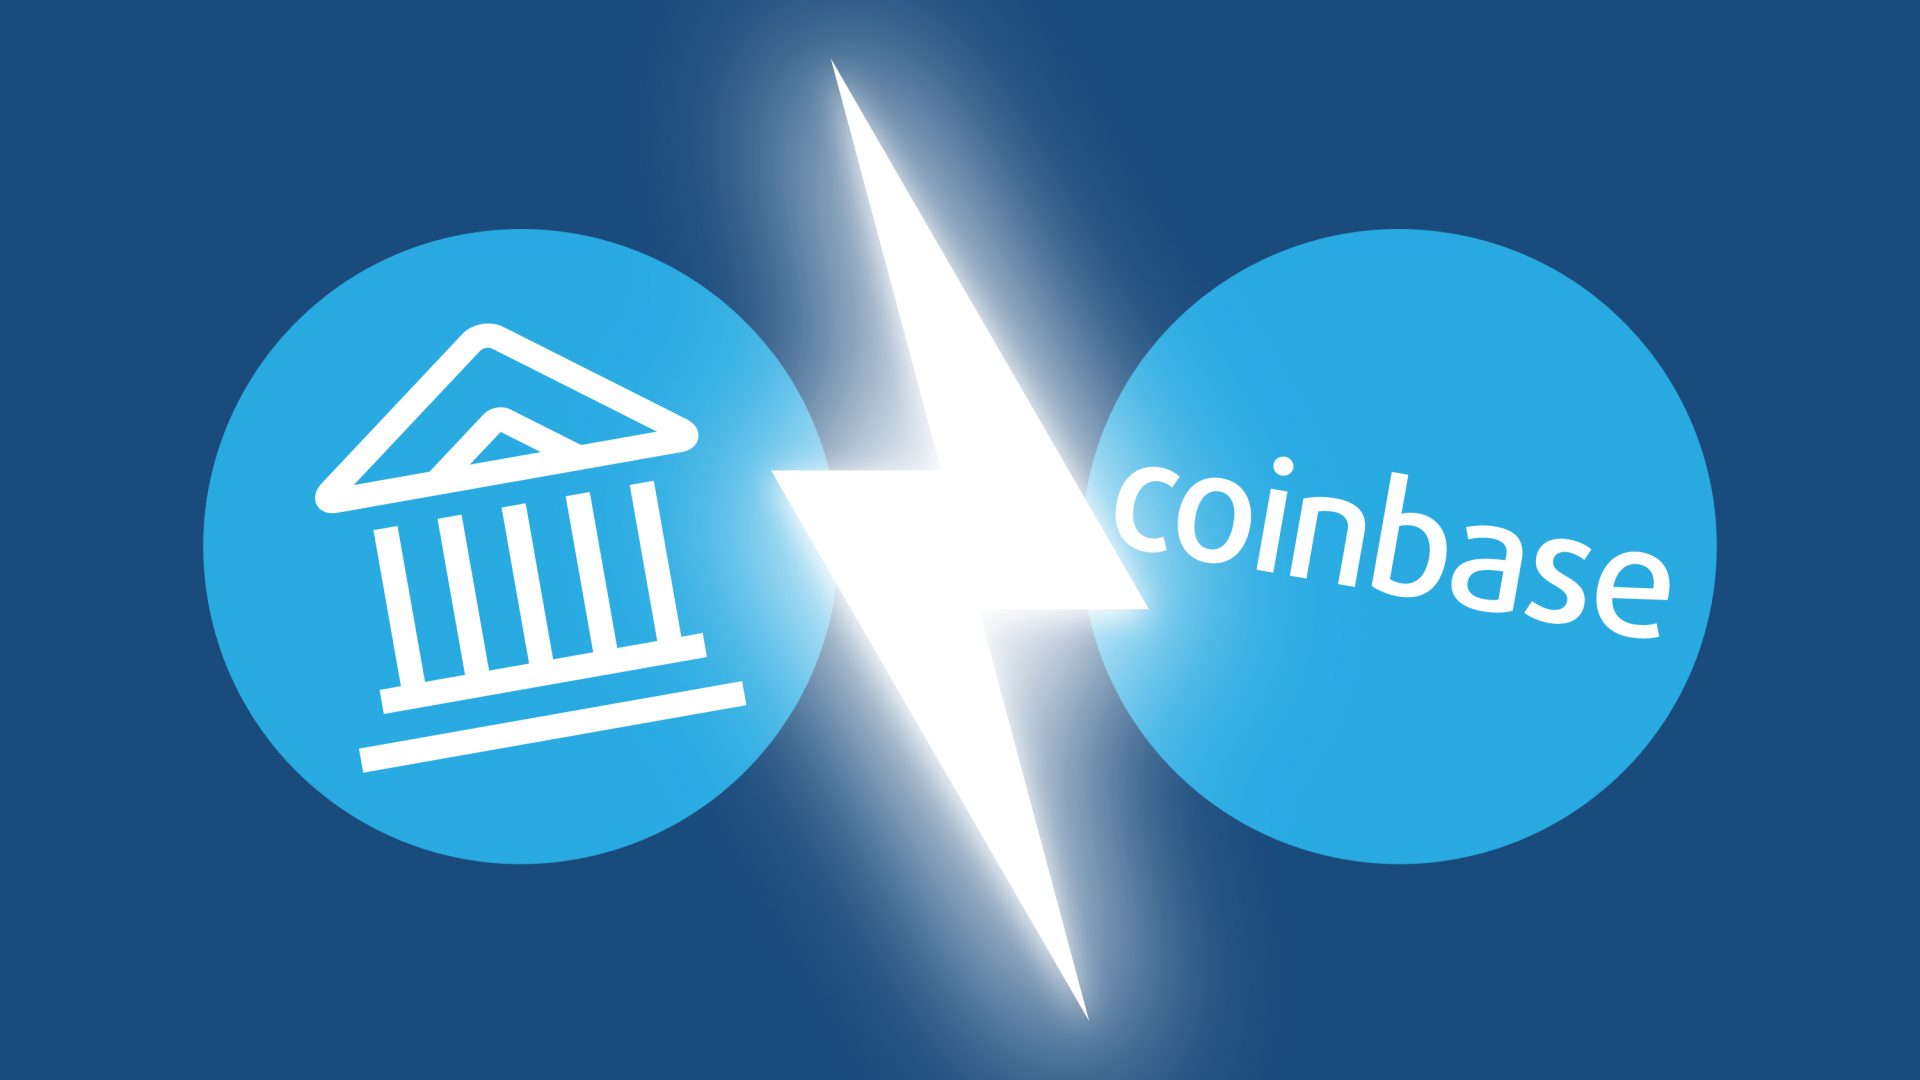 Conio Teams Up With Coinbase to Bring Crypto to Banks